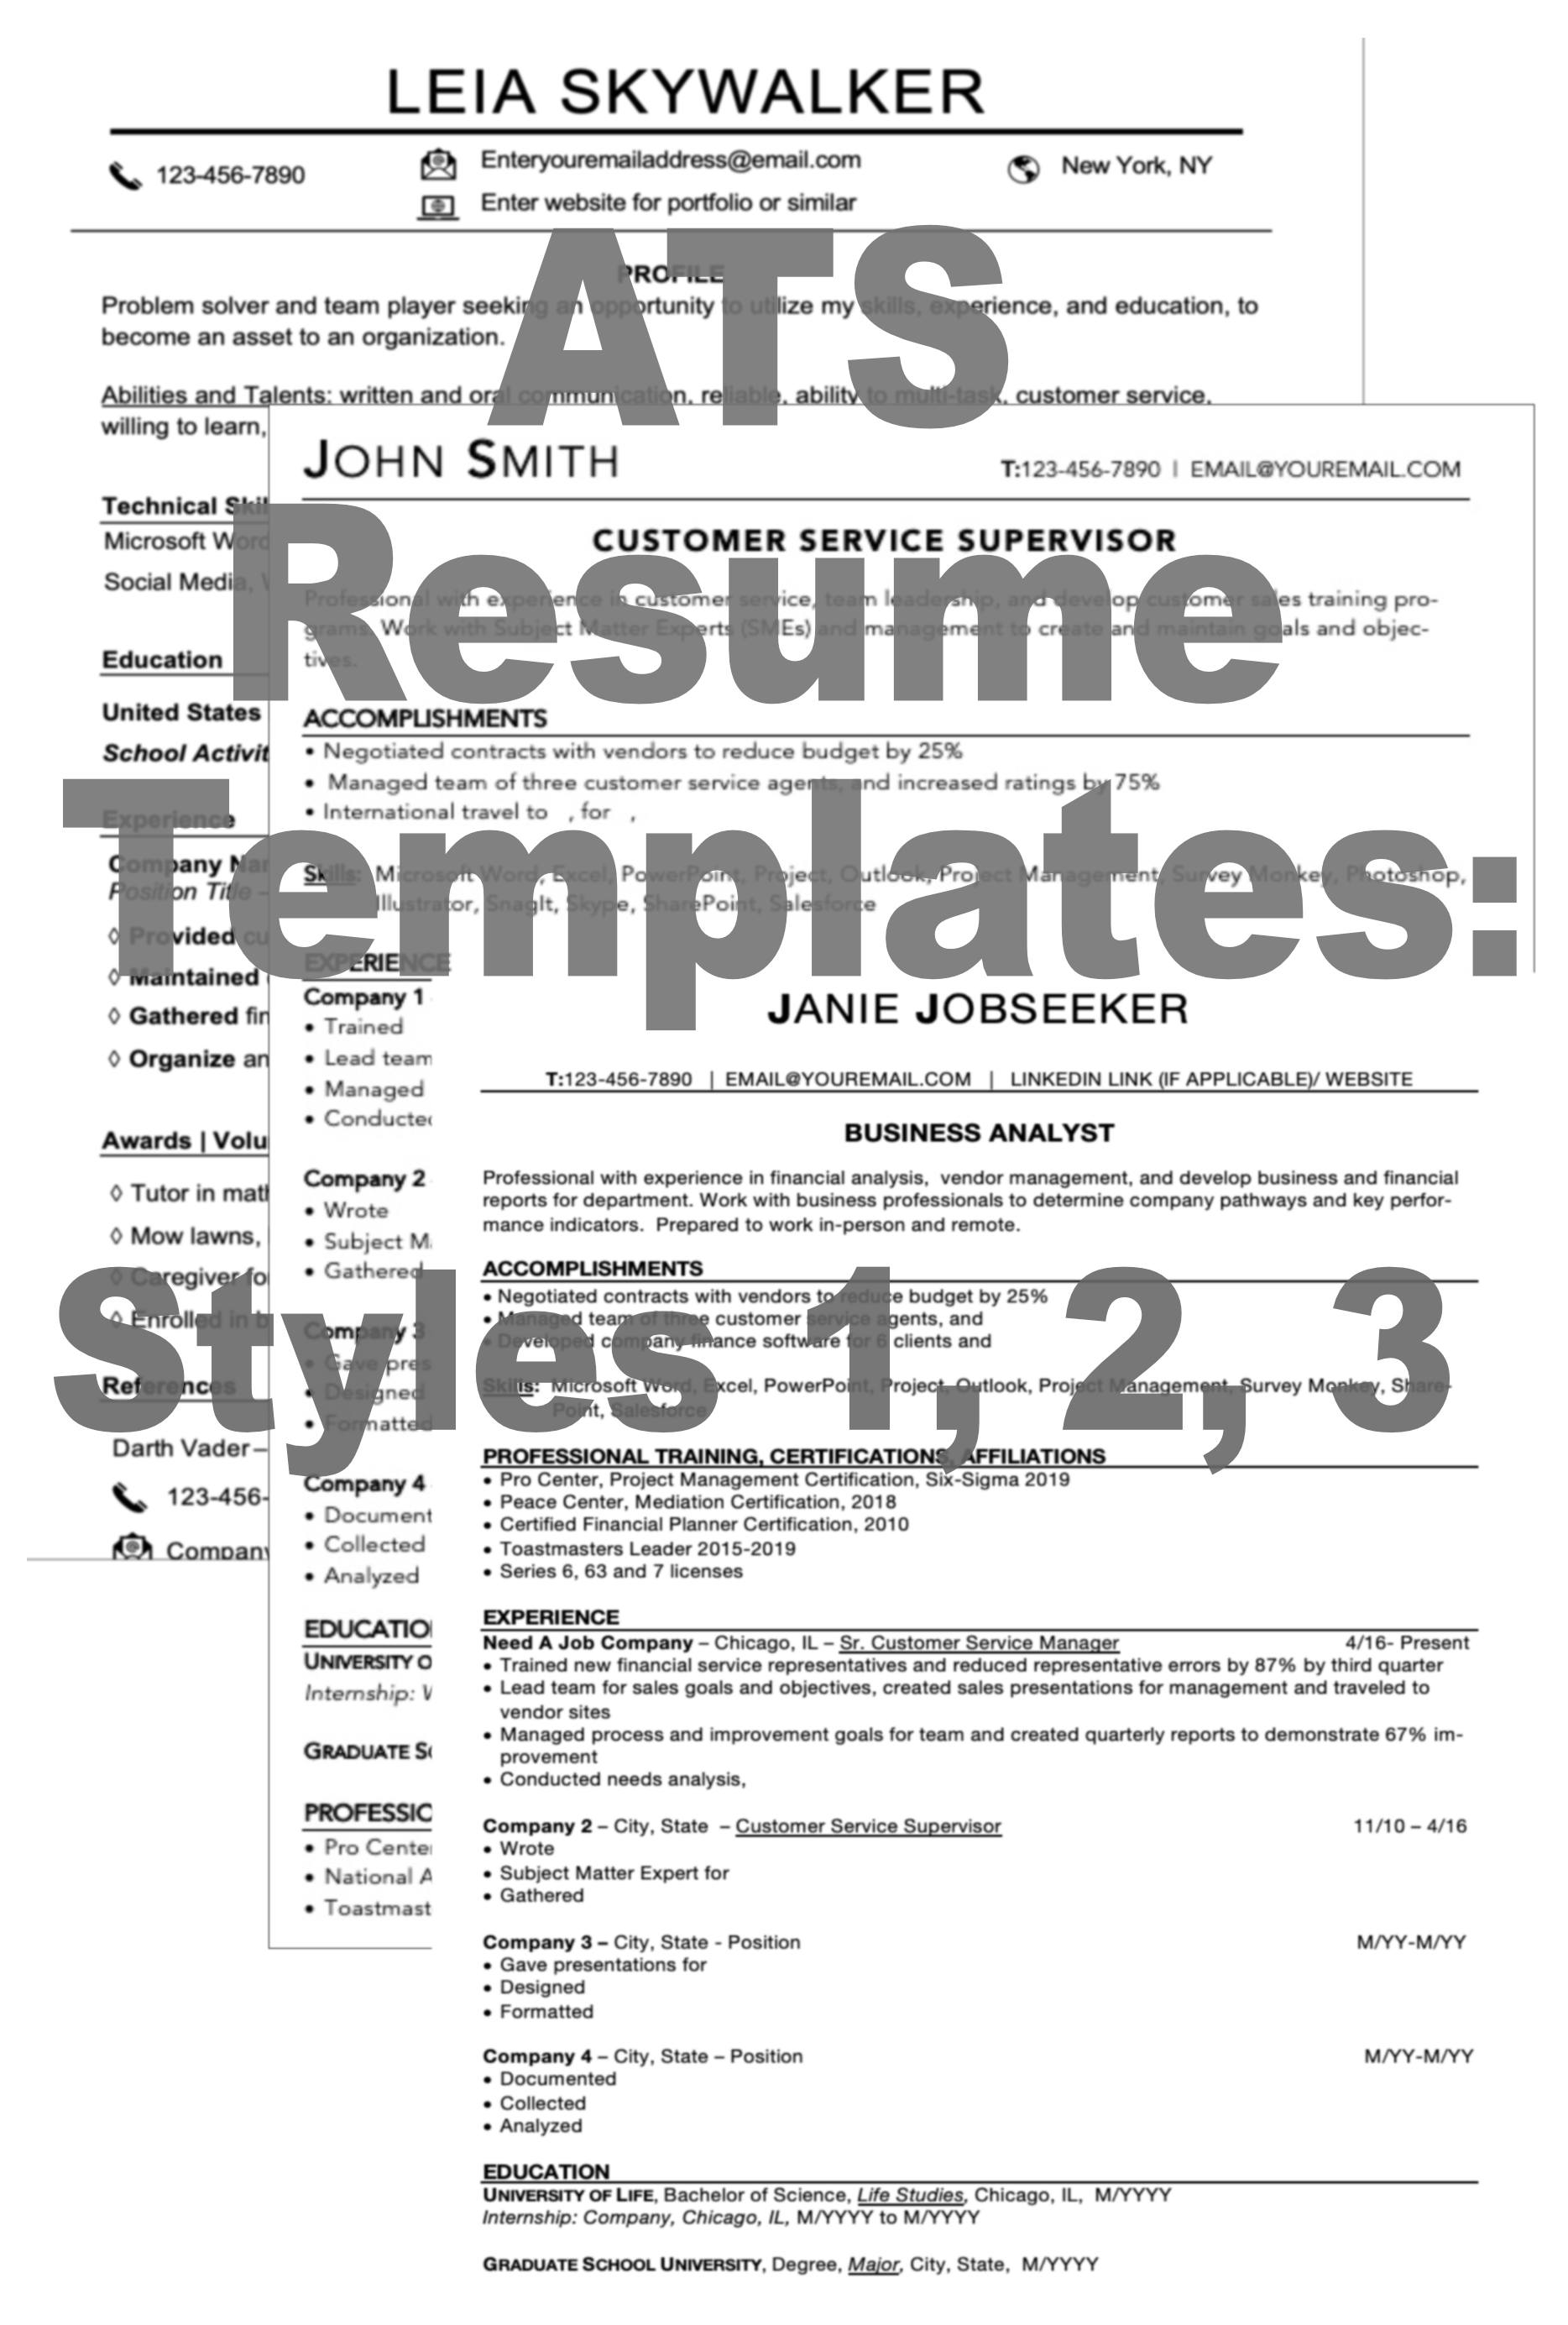 ats resumes and cv resume templates are needed to get job interviews.  Along with a professional resume, be prepared with an interview thank you email, and letter of recommendation, and know how to write a two-week notice, how to write a cover letter, how to write a letter of resignation, and know the difference between a cv vs resume